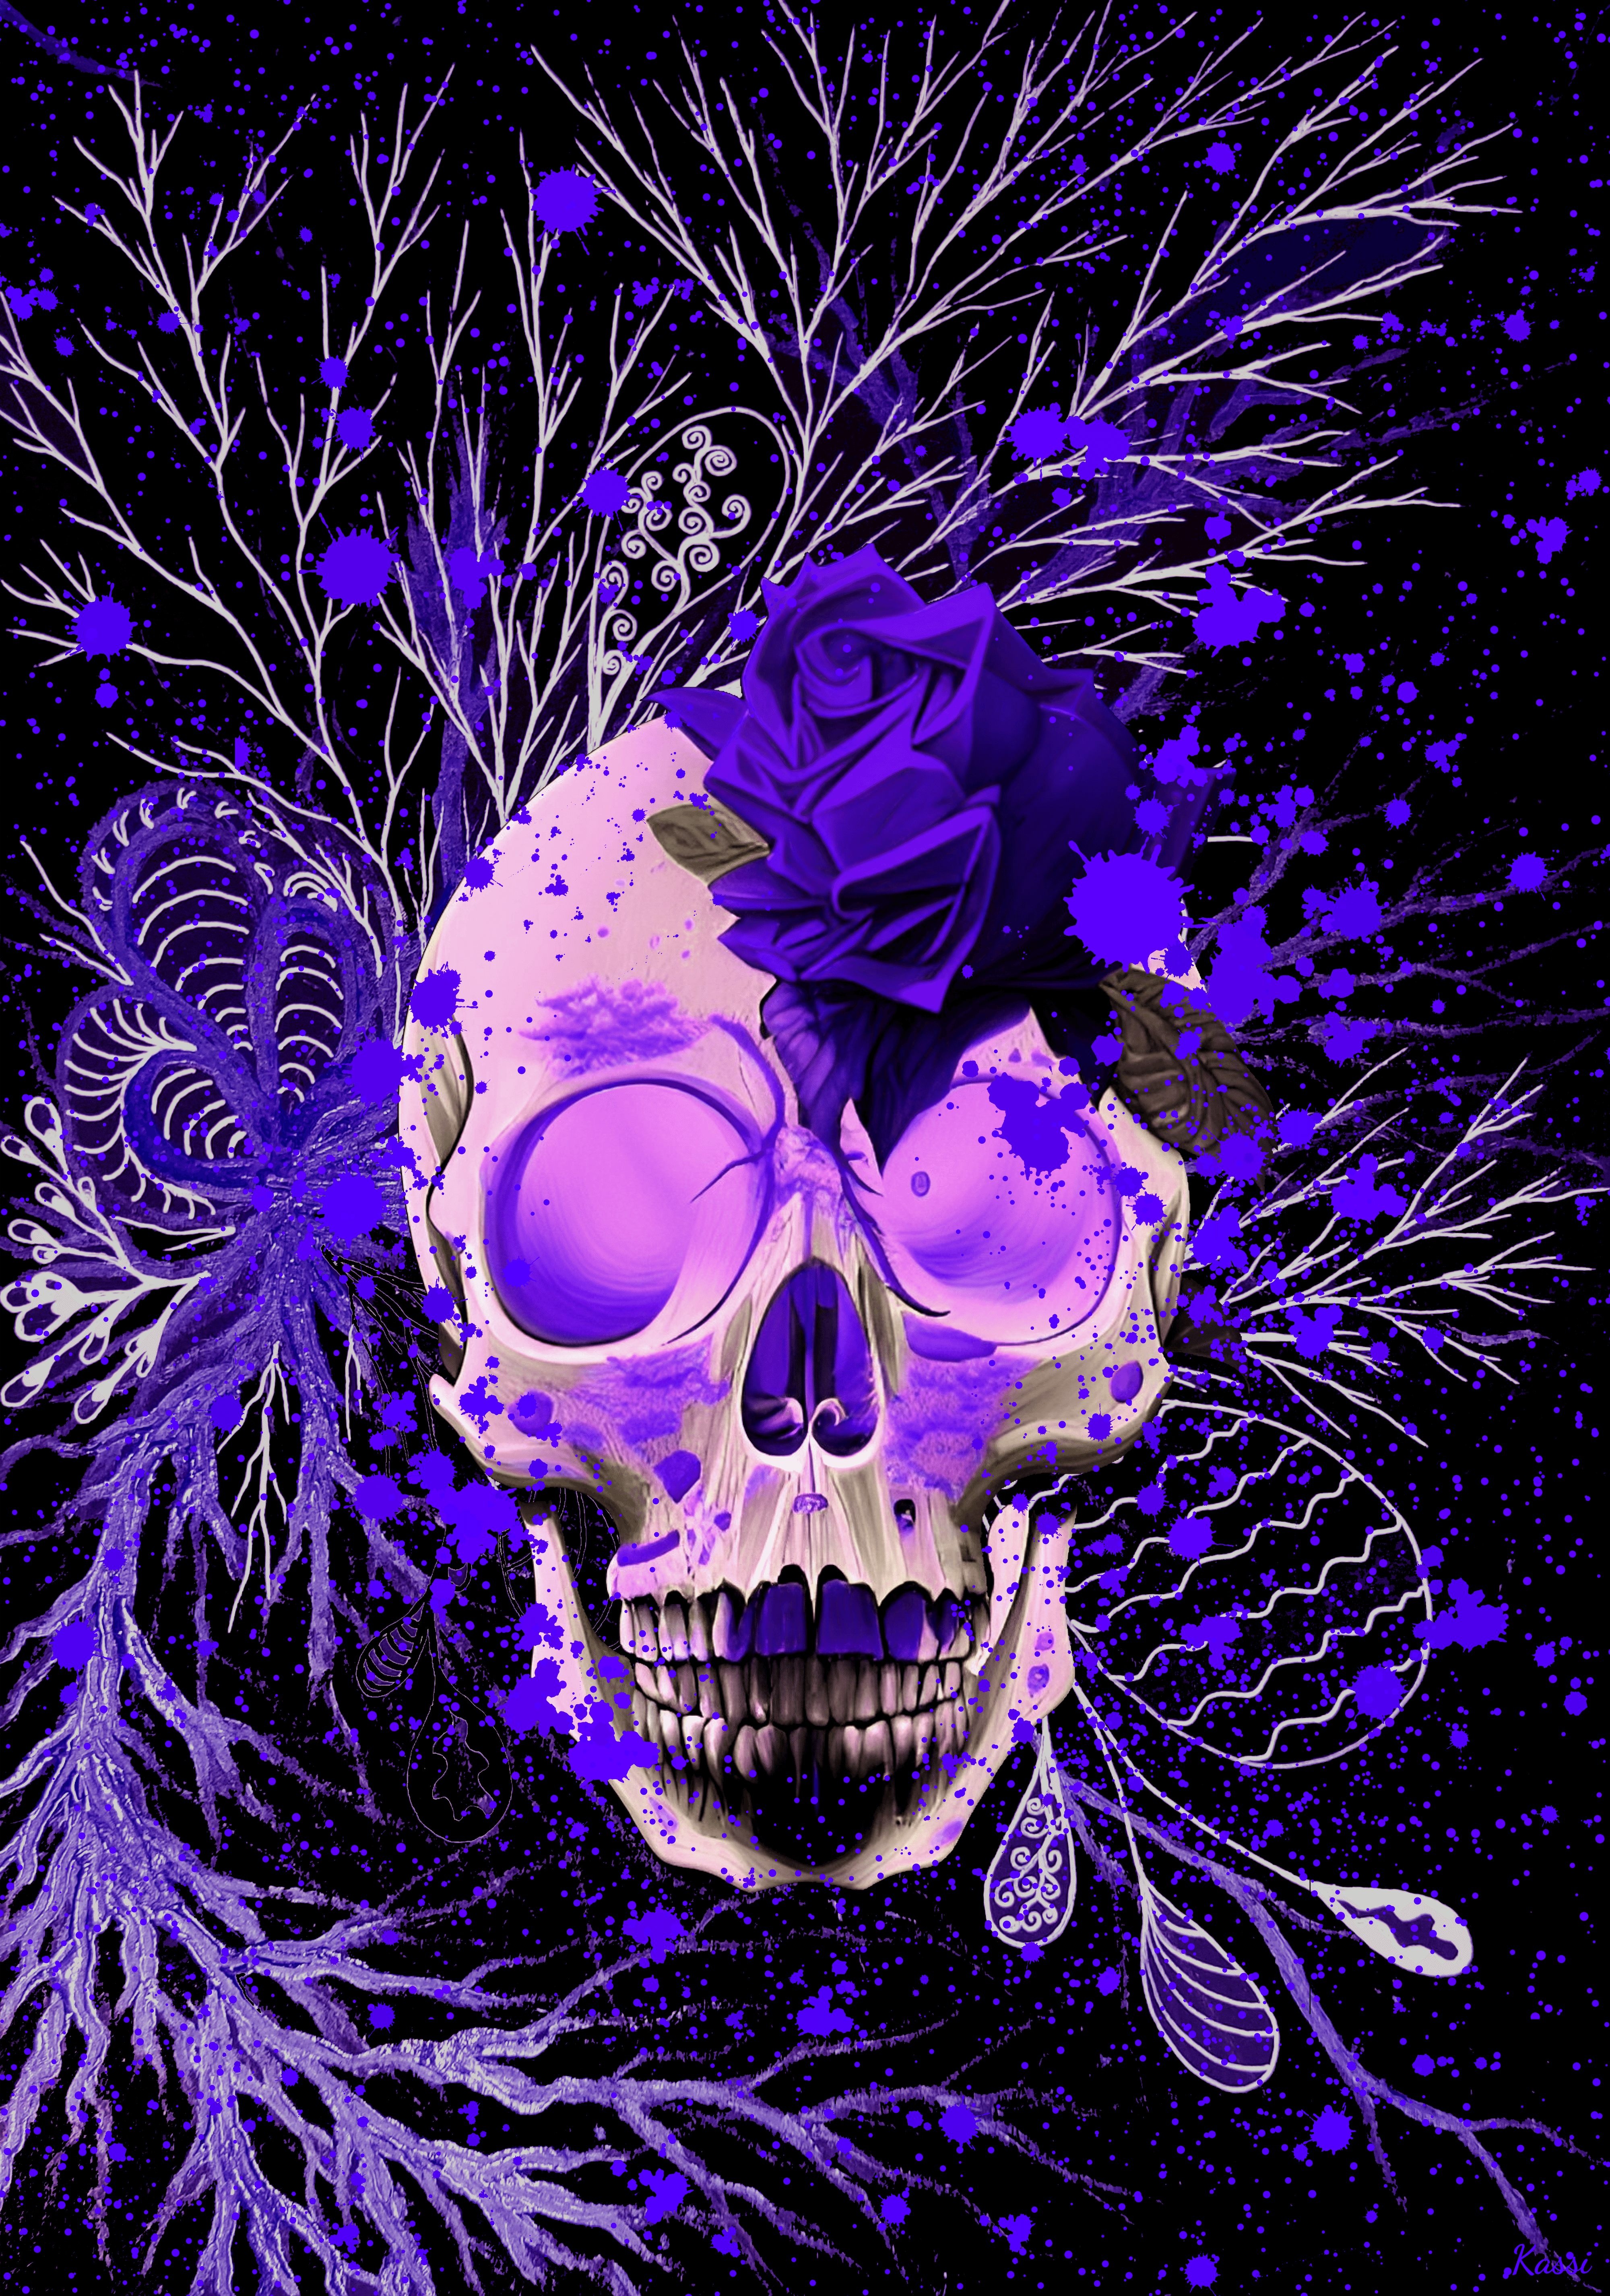 "Purple 💀 with flowers "